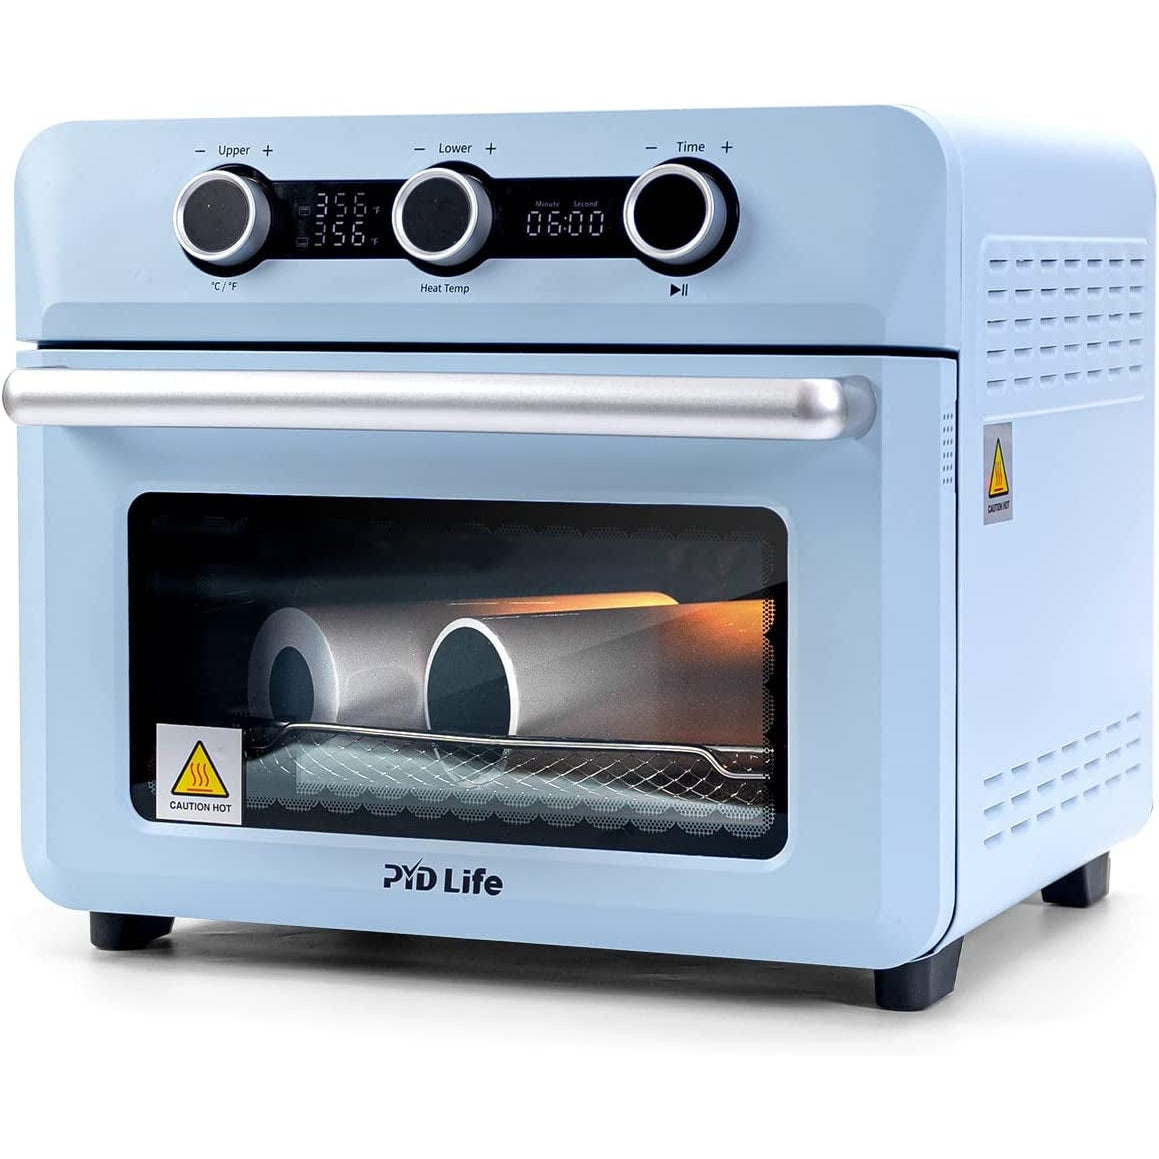 PYD Life Sublimation Oven